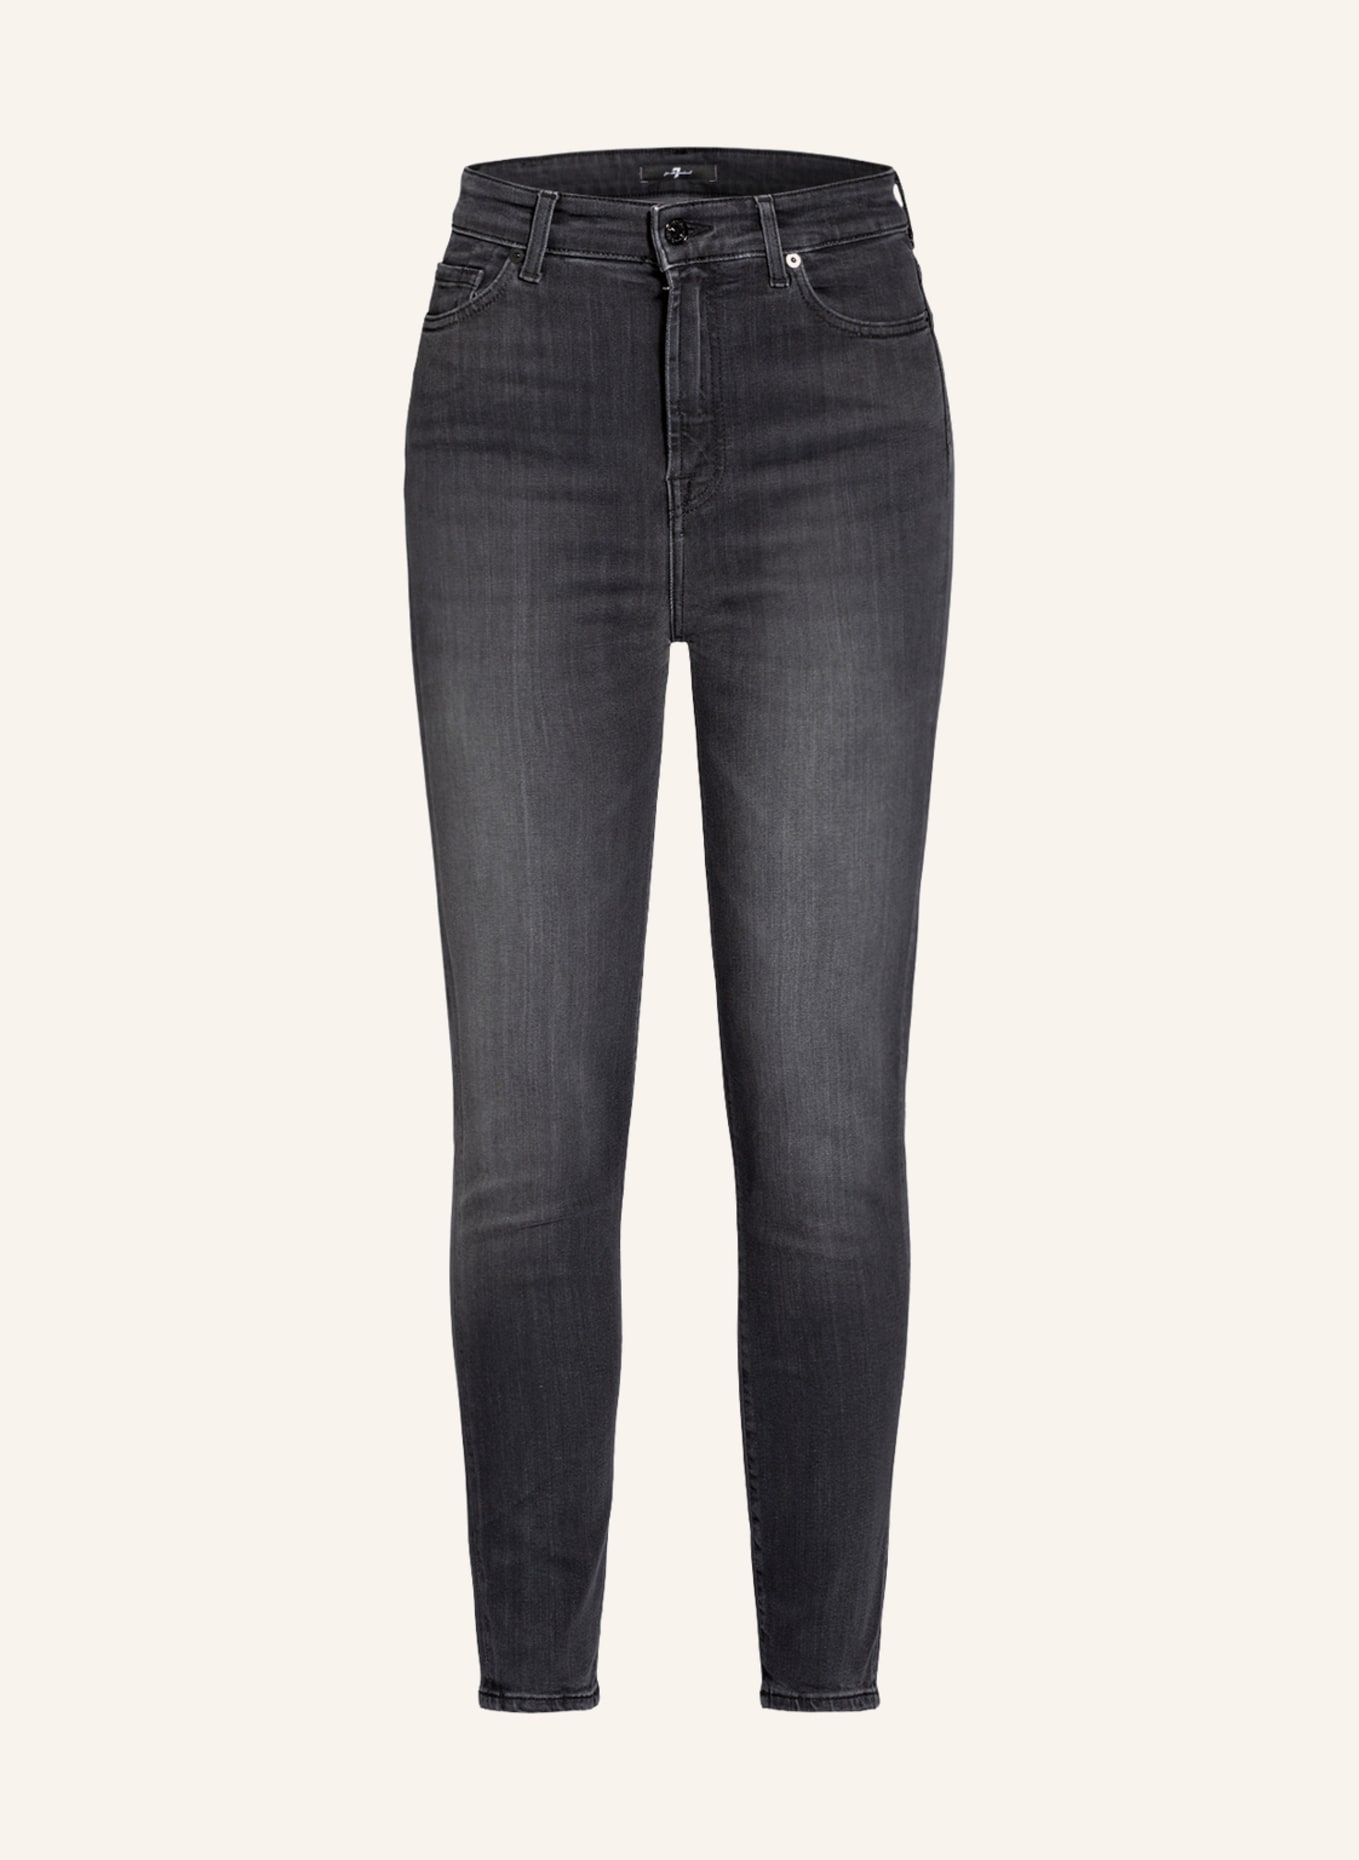 7 For All Mankind Skinny Slim Illusion Luxe Jeans, Rinse Black at